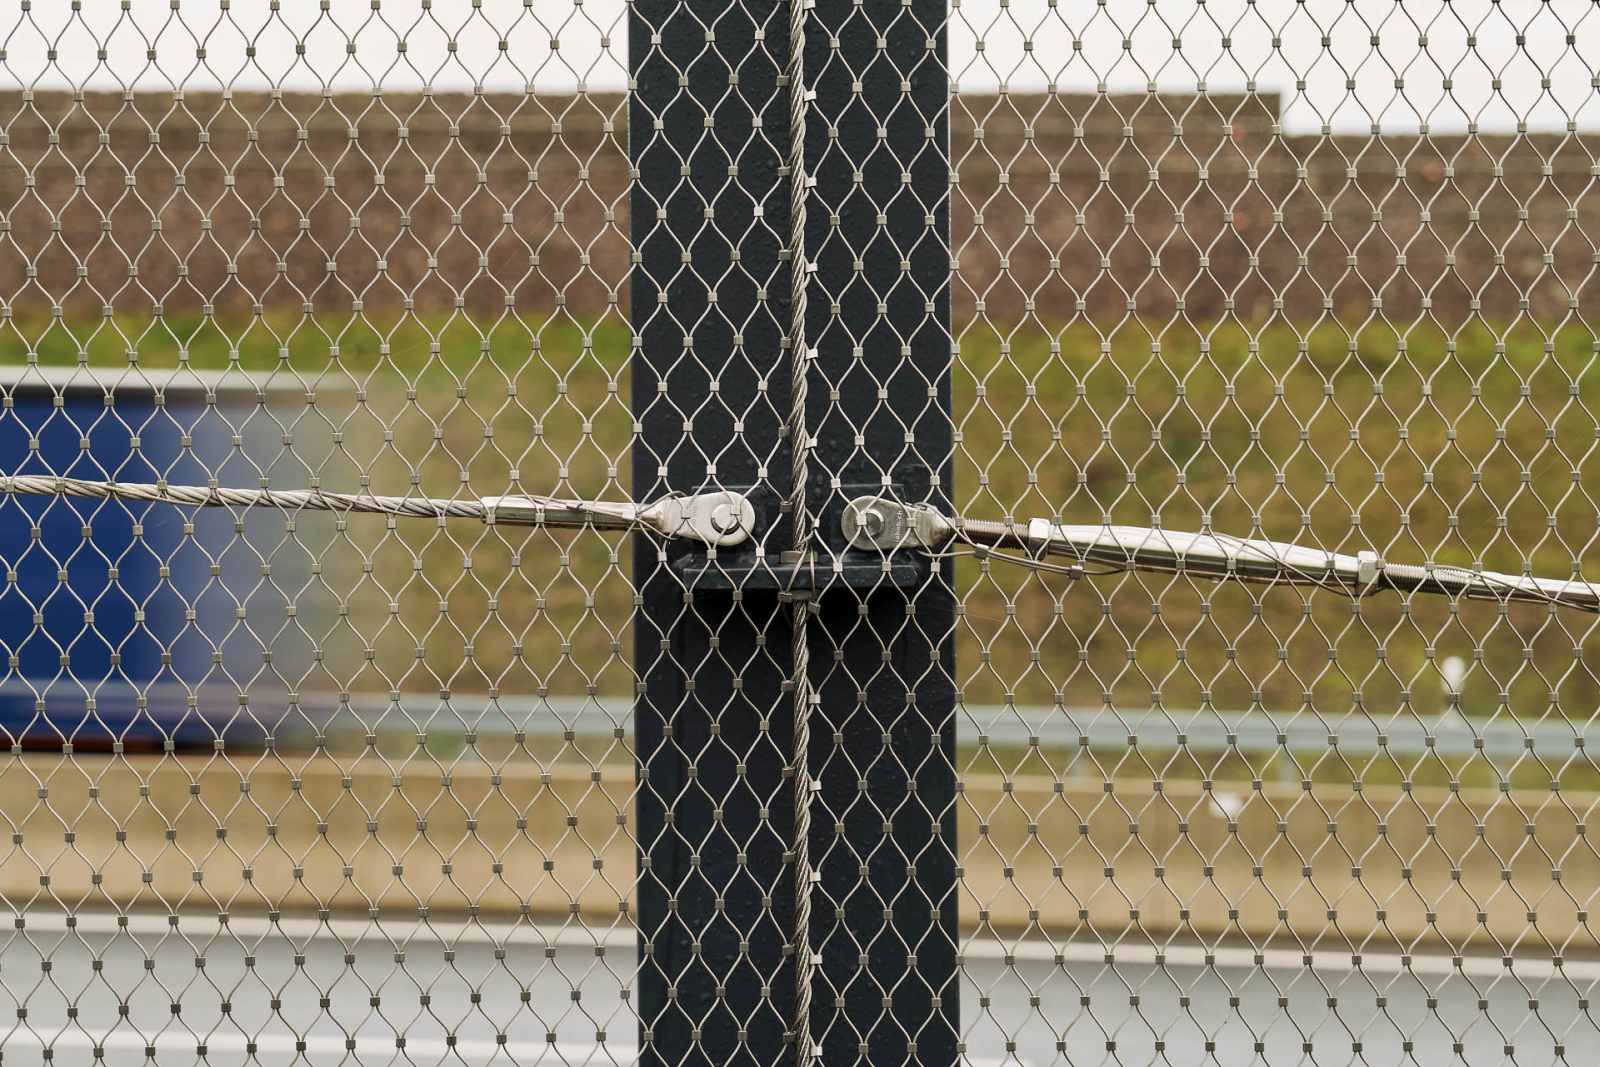 Two turnbuckles and guy ropes of the stainless steel cable mesh fence